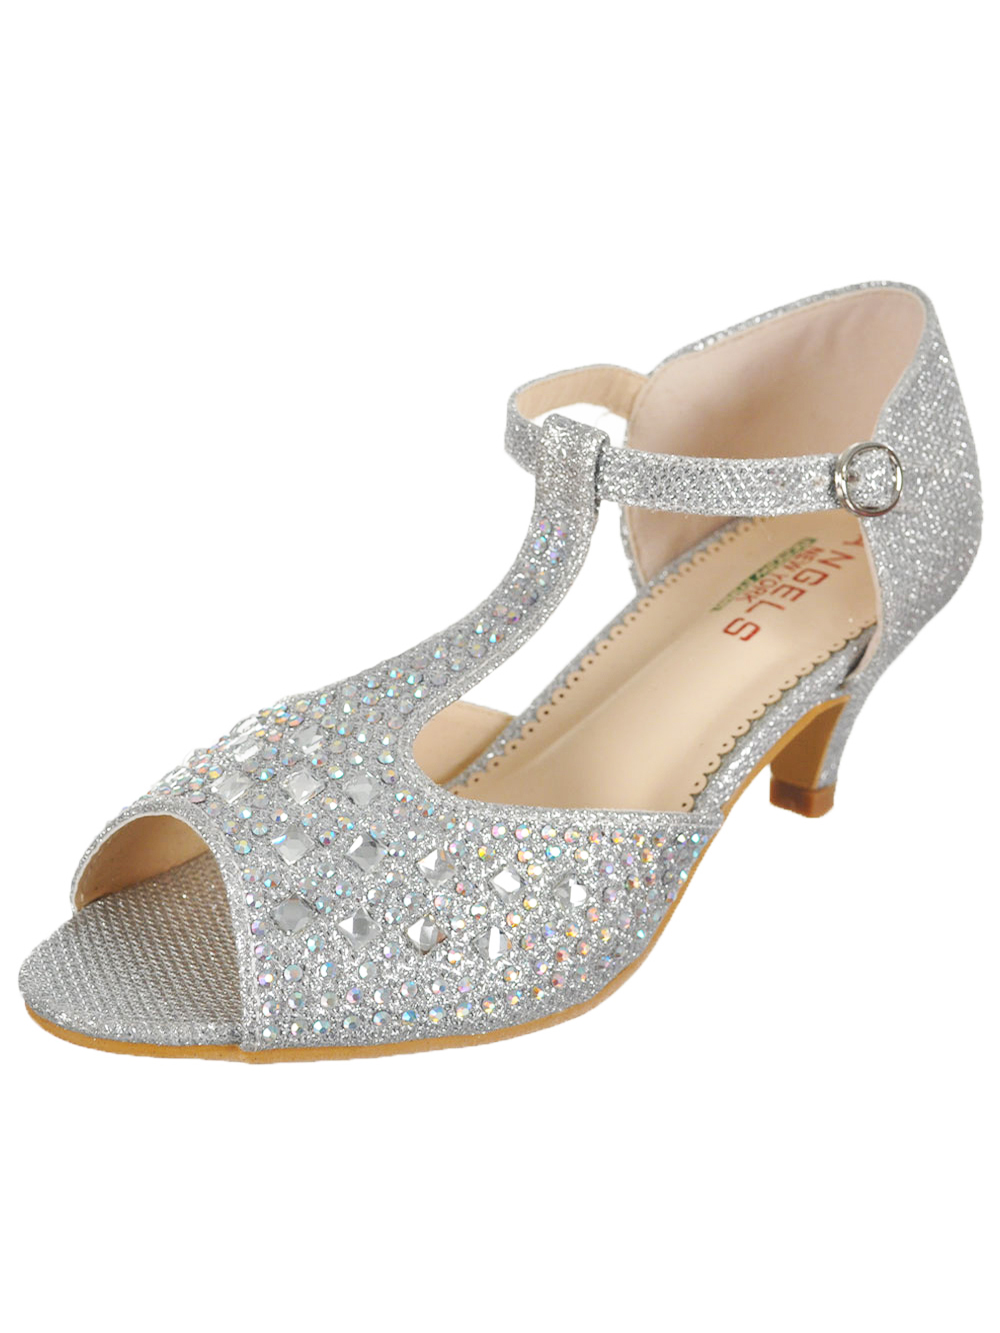 Angels Girls' Rhinestone T-Strap Pumps (Sizes 13 - 5) - silver, 5 youth - image 1 of 3